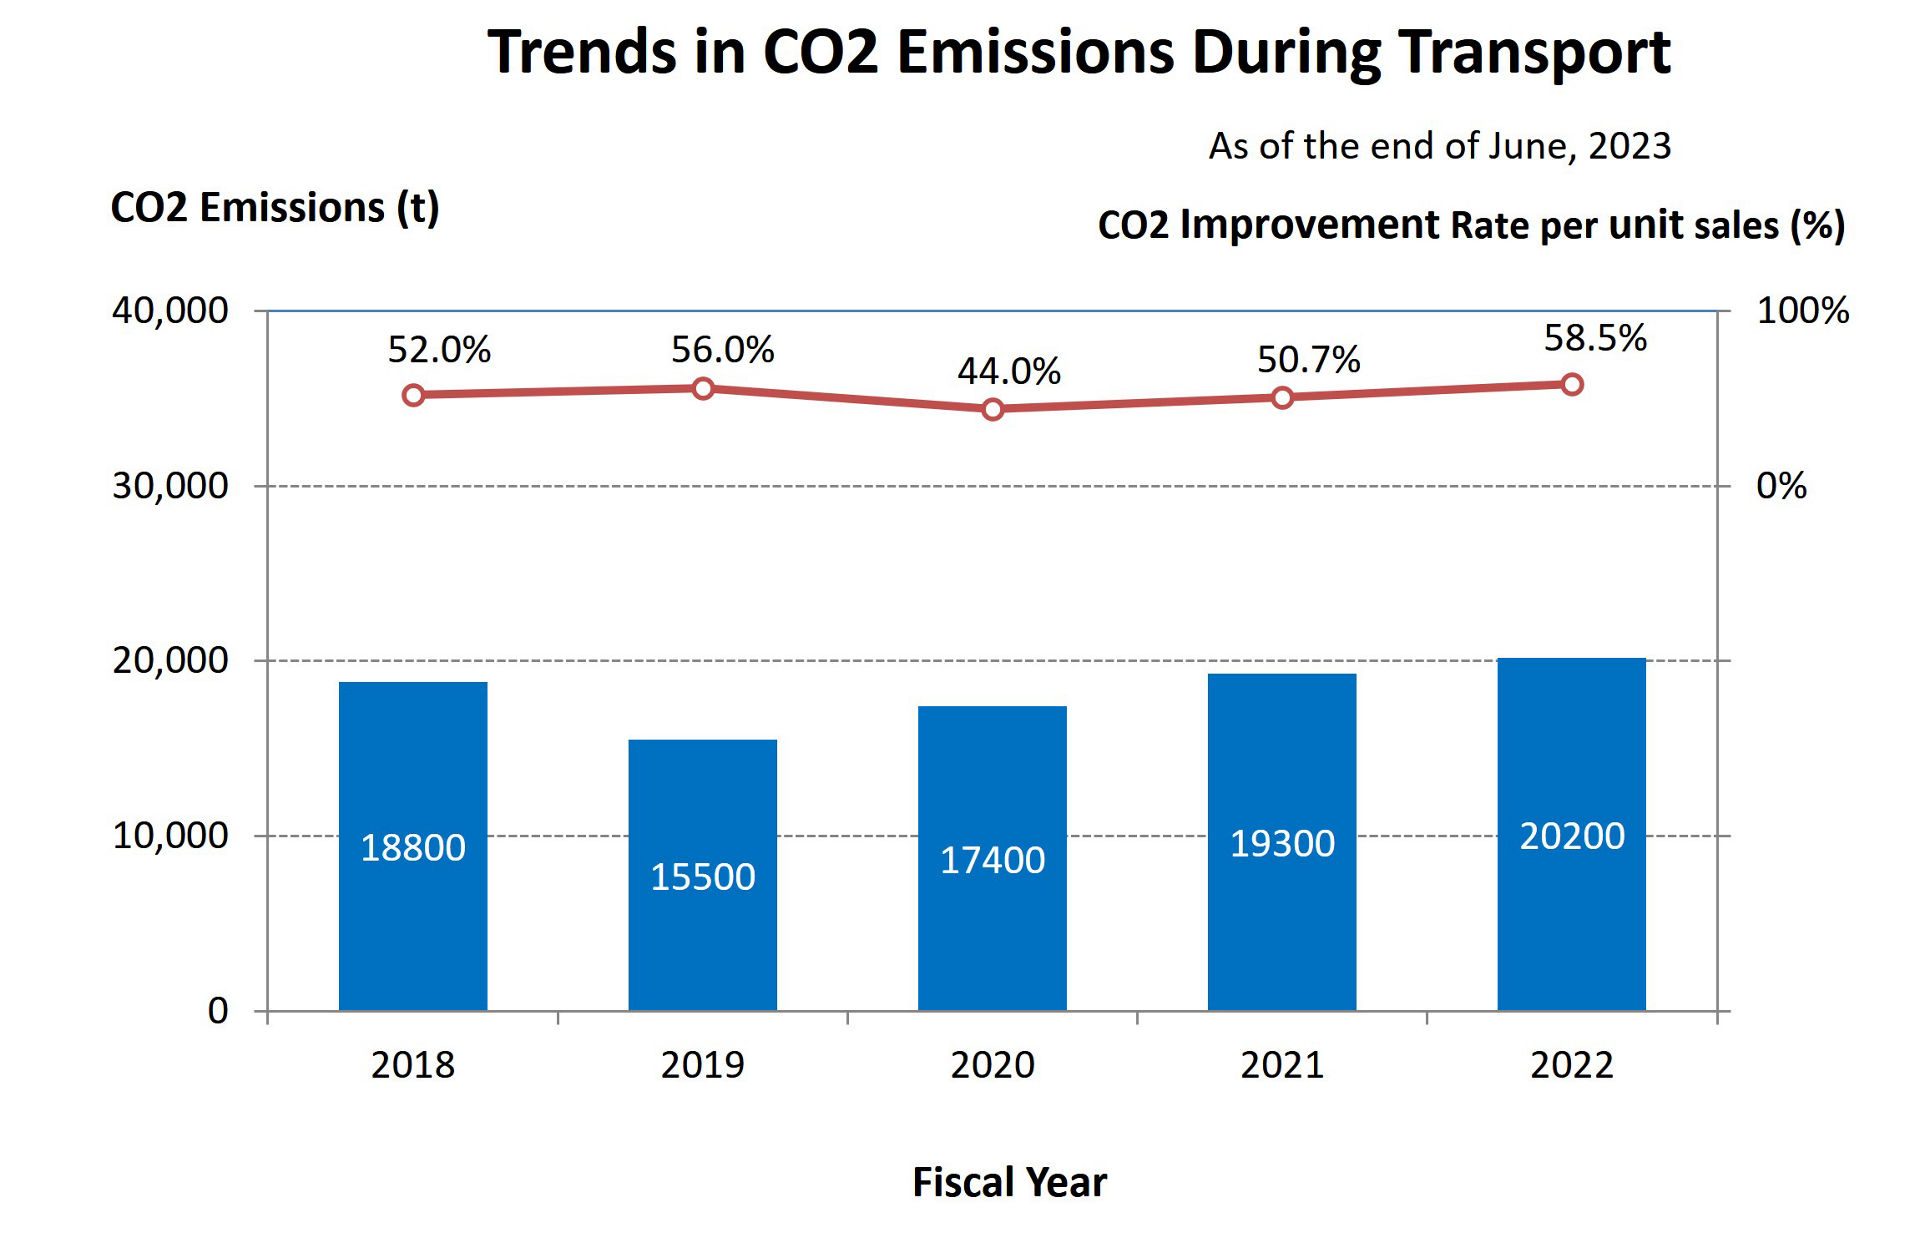 Trends in CO2 Emissions During Transport